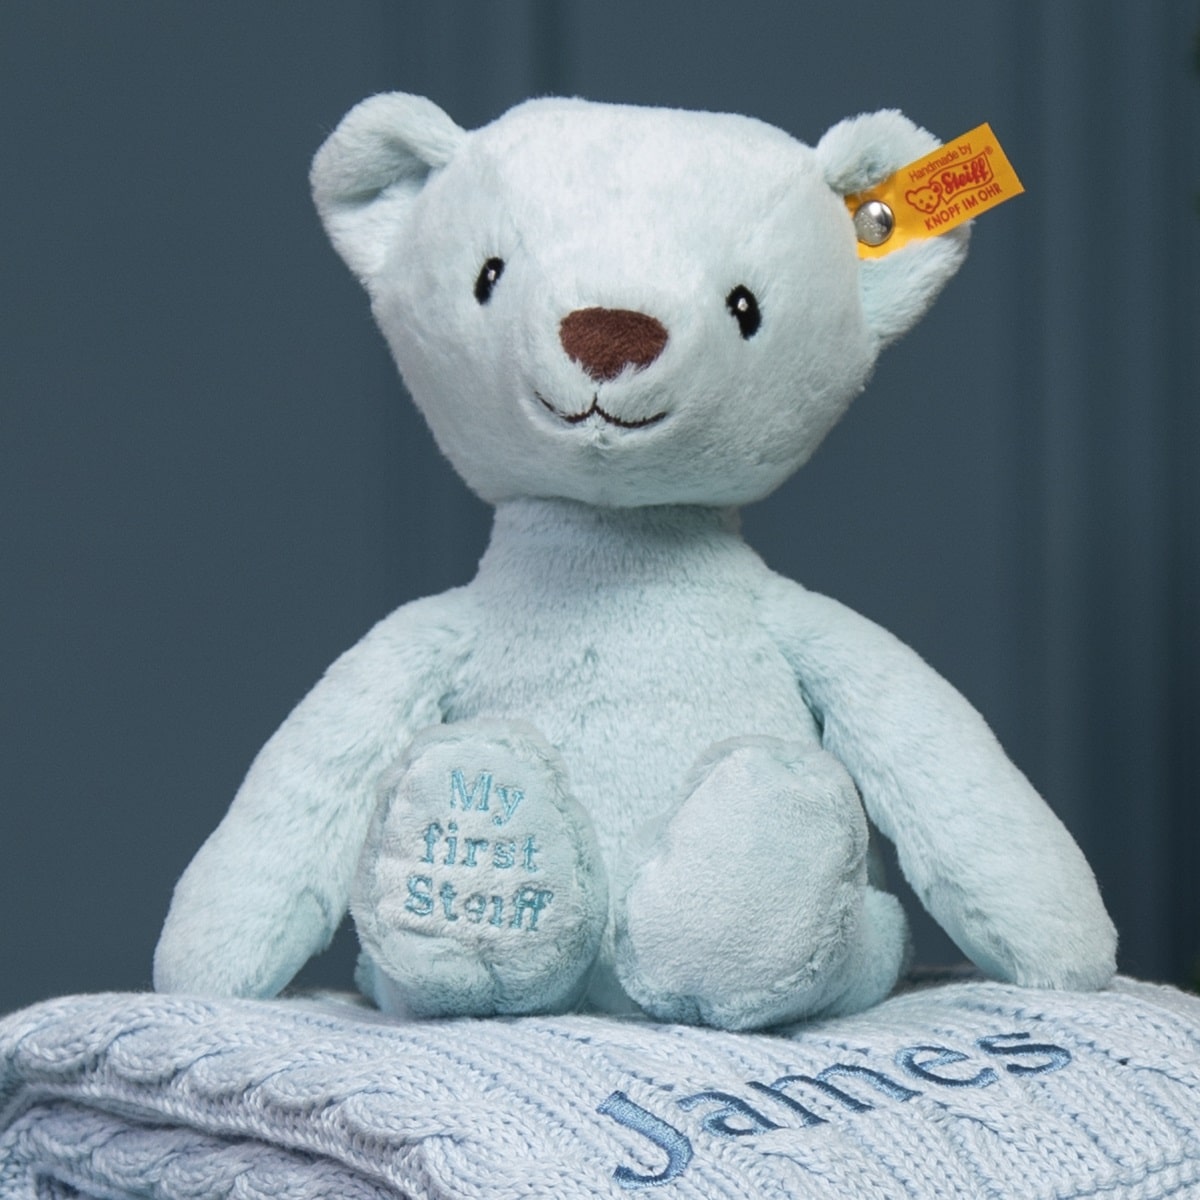 My First Steiff Teddy Bear blue soft toy and Toffee Moon luxury cable blanket gift set